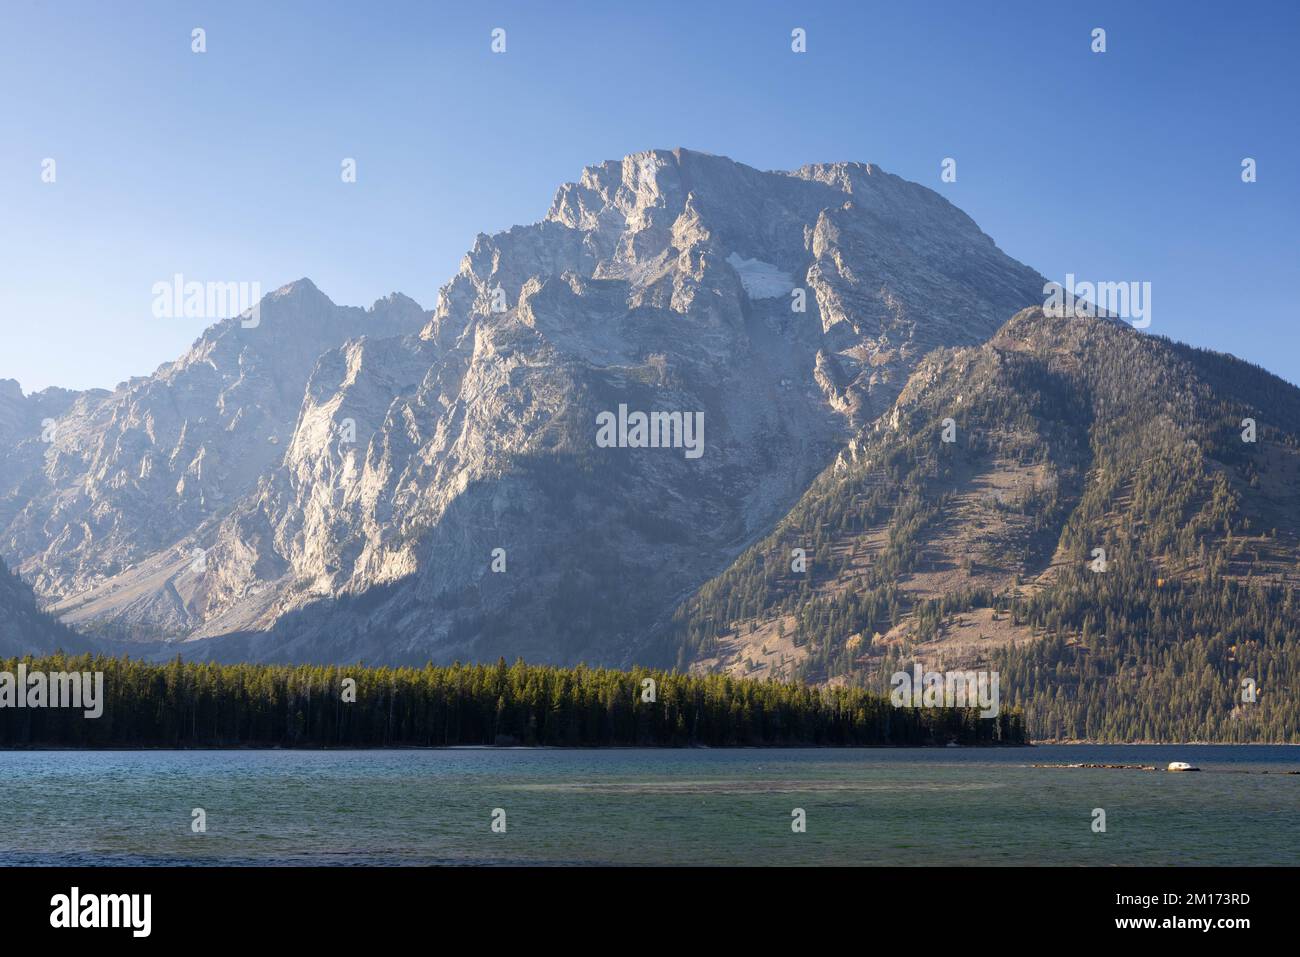 Mount Moran towering over the clear waters of Leigh Lake. Grand Teton National Park, Wyoming Stock Photo